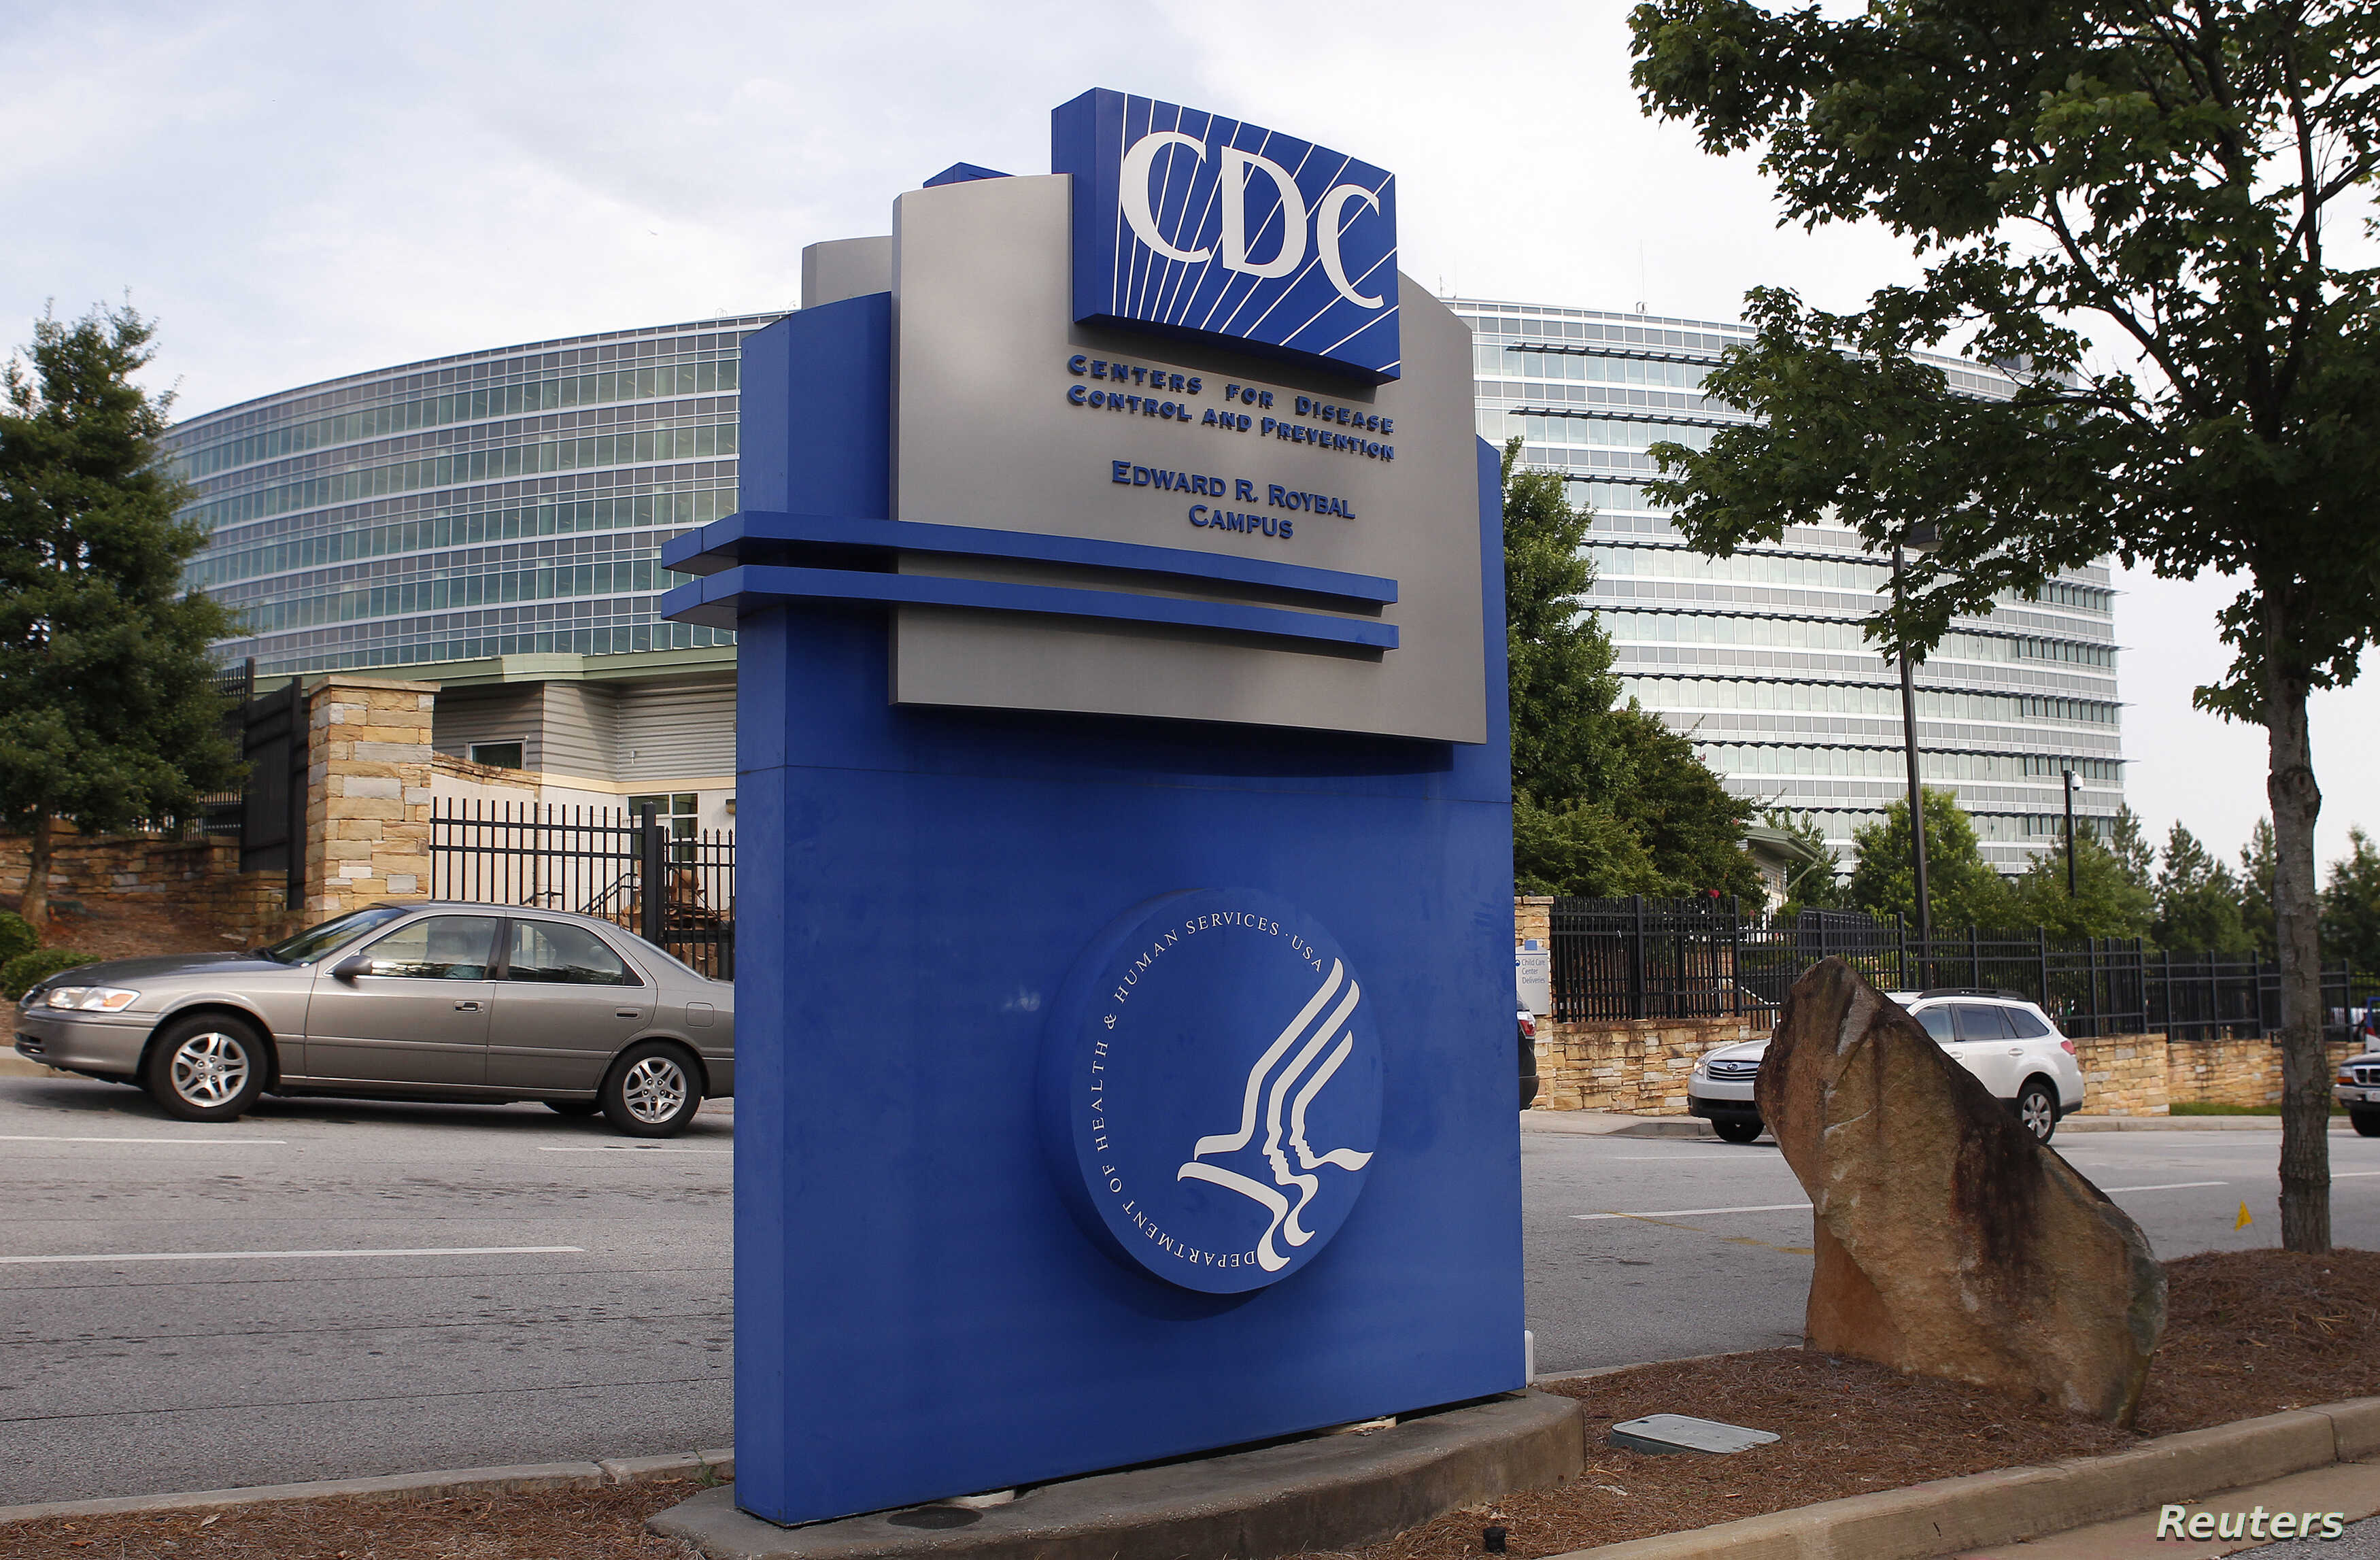 The Centers for Disease Control sign is seen at its main facility in Atlanta, Georgia June 20, 2014. U.S. authorities increased to 84 people their count of government workers potentially exposed to live anthrax at three laboratories in Atlanta as they investigated a breach in safety procedures for handling the deadly pathogen. Researchers in the CDC's high-security Bioterror Rapid Response and Advanced Technology laboratory realized they had sent live anthrax bacteria, instead of what they thought were harmless samples, to fellow scientists in two lower-security labs at the agency. REUTERS/Tami Chappell (UNITED STATES - Tags: HEALTH POLITICS) - RTR3UXYK